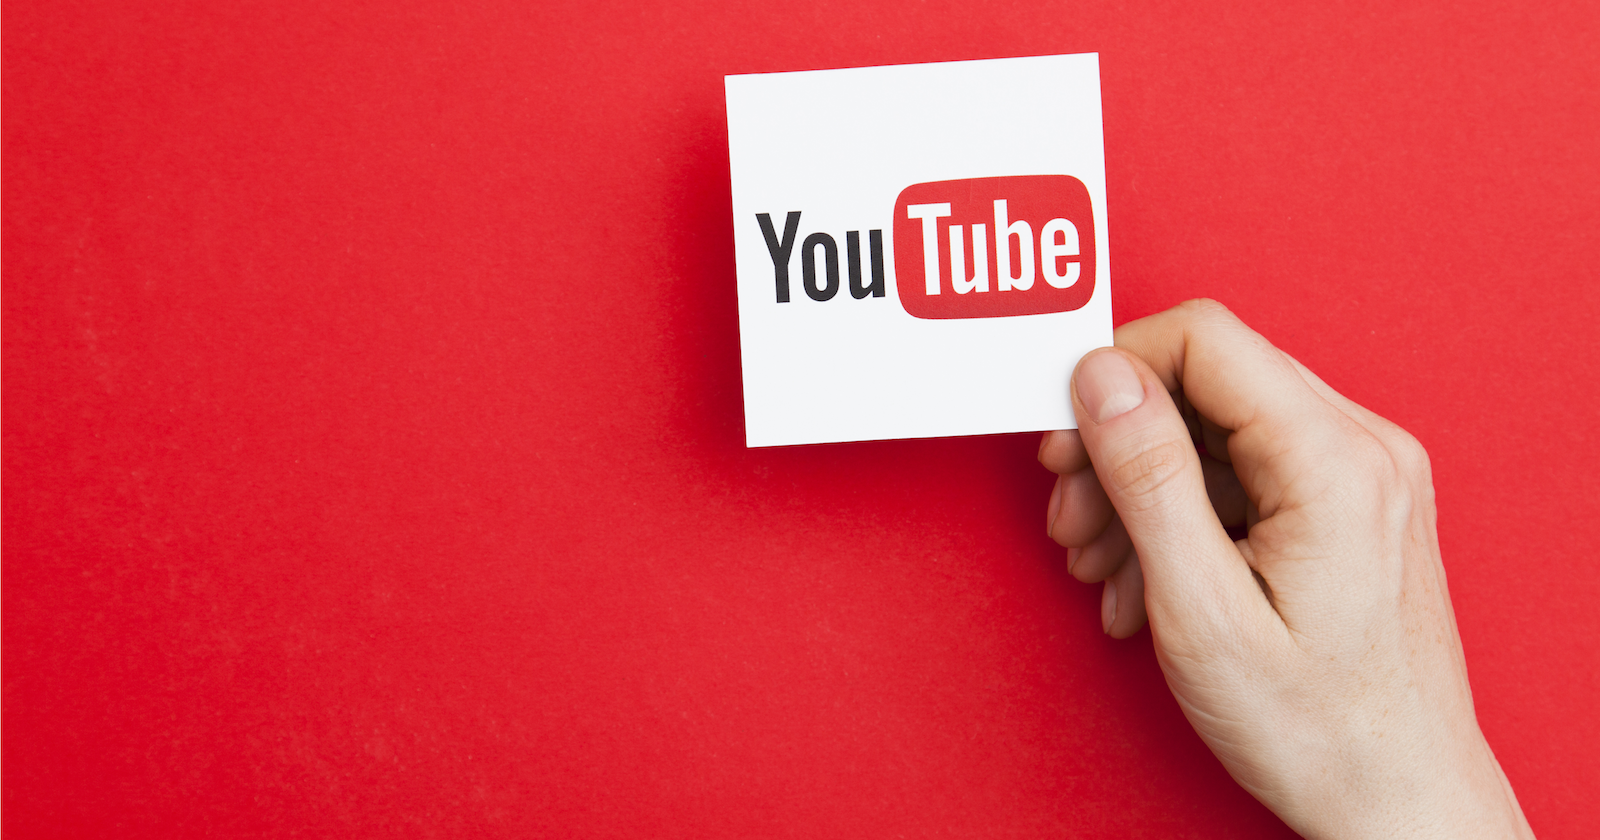 Not Happy With Your YouTube URL? Here's How You Can Change It